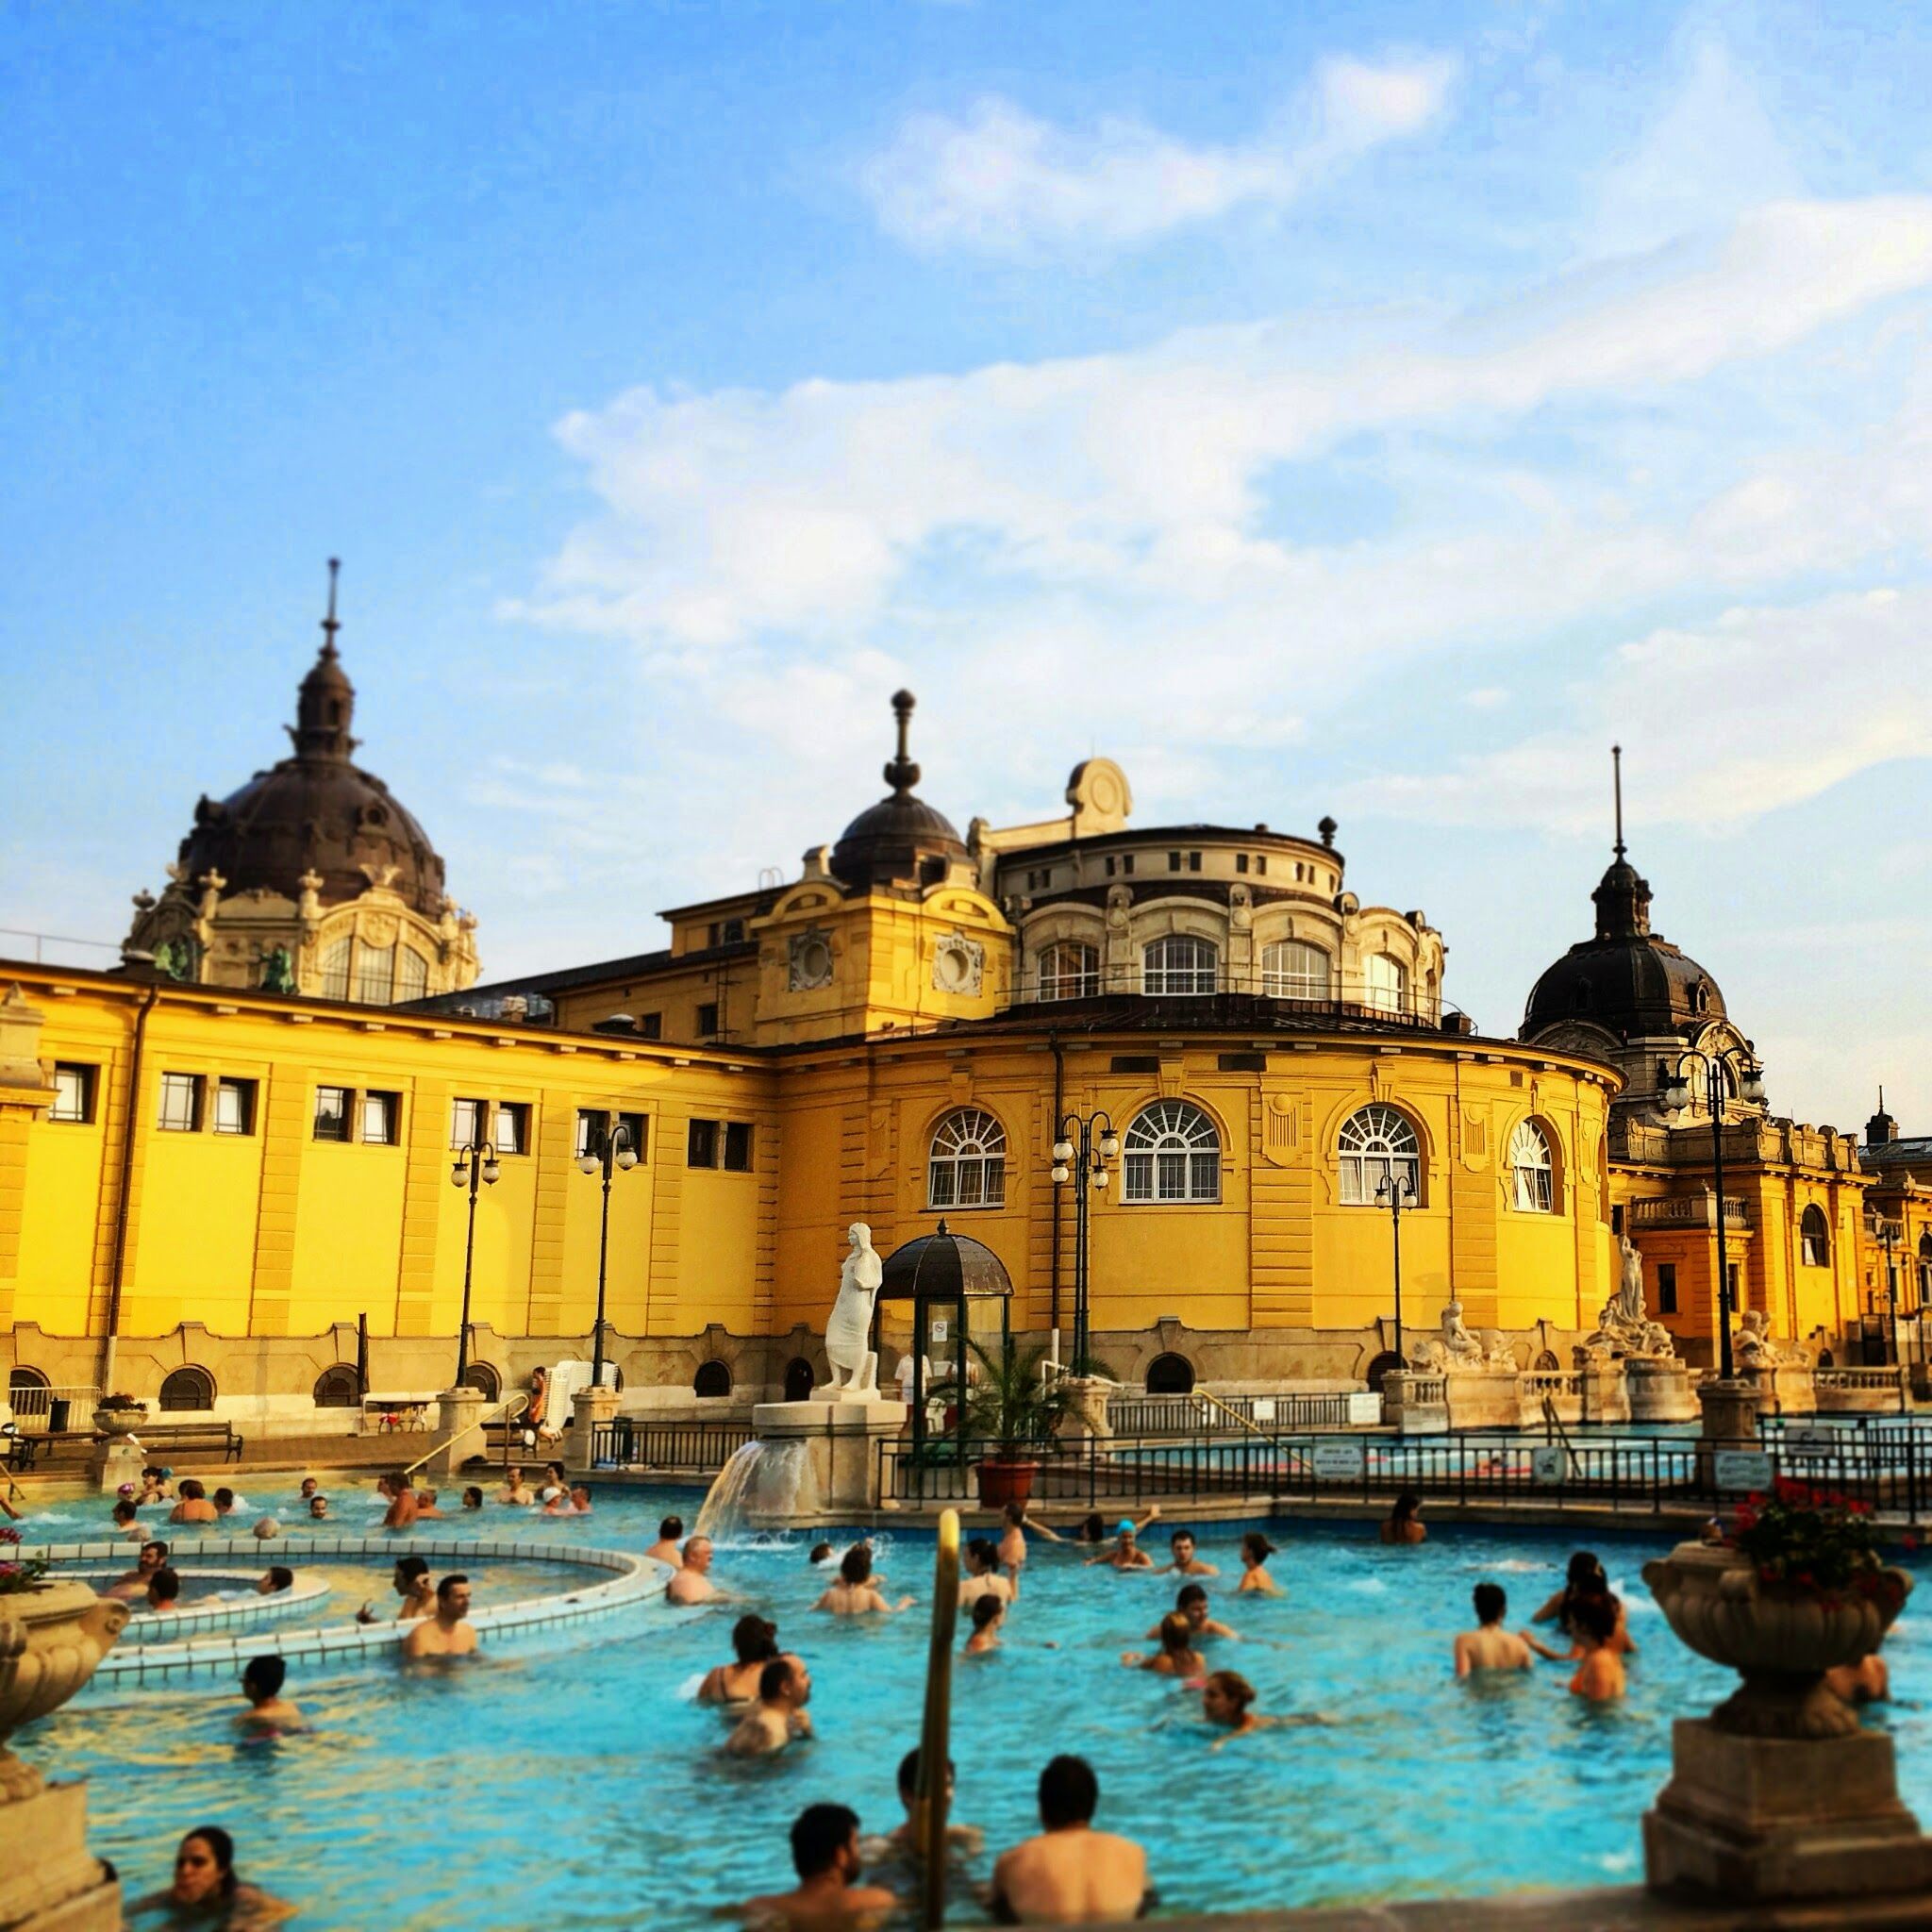 Hidden Gems Tour of Budapest - the Drinking Hall of the Széchenyi Baths